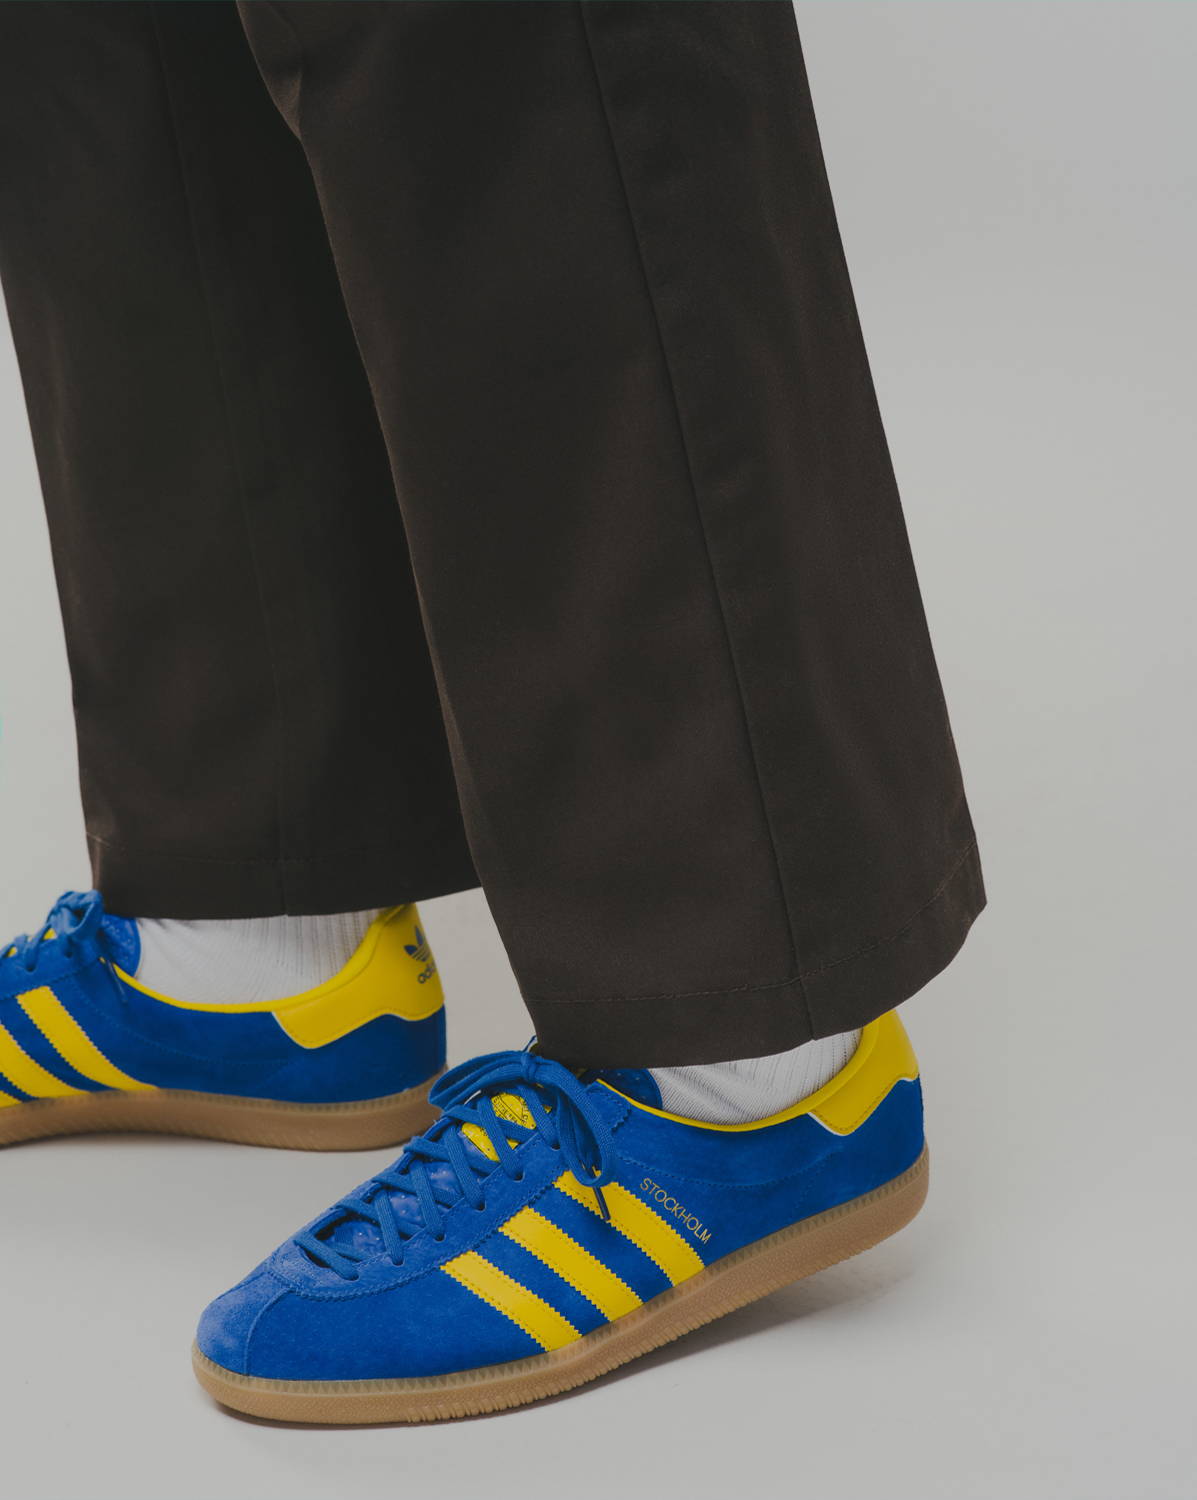 adidas Stockholm is coming back!